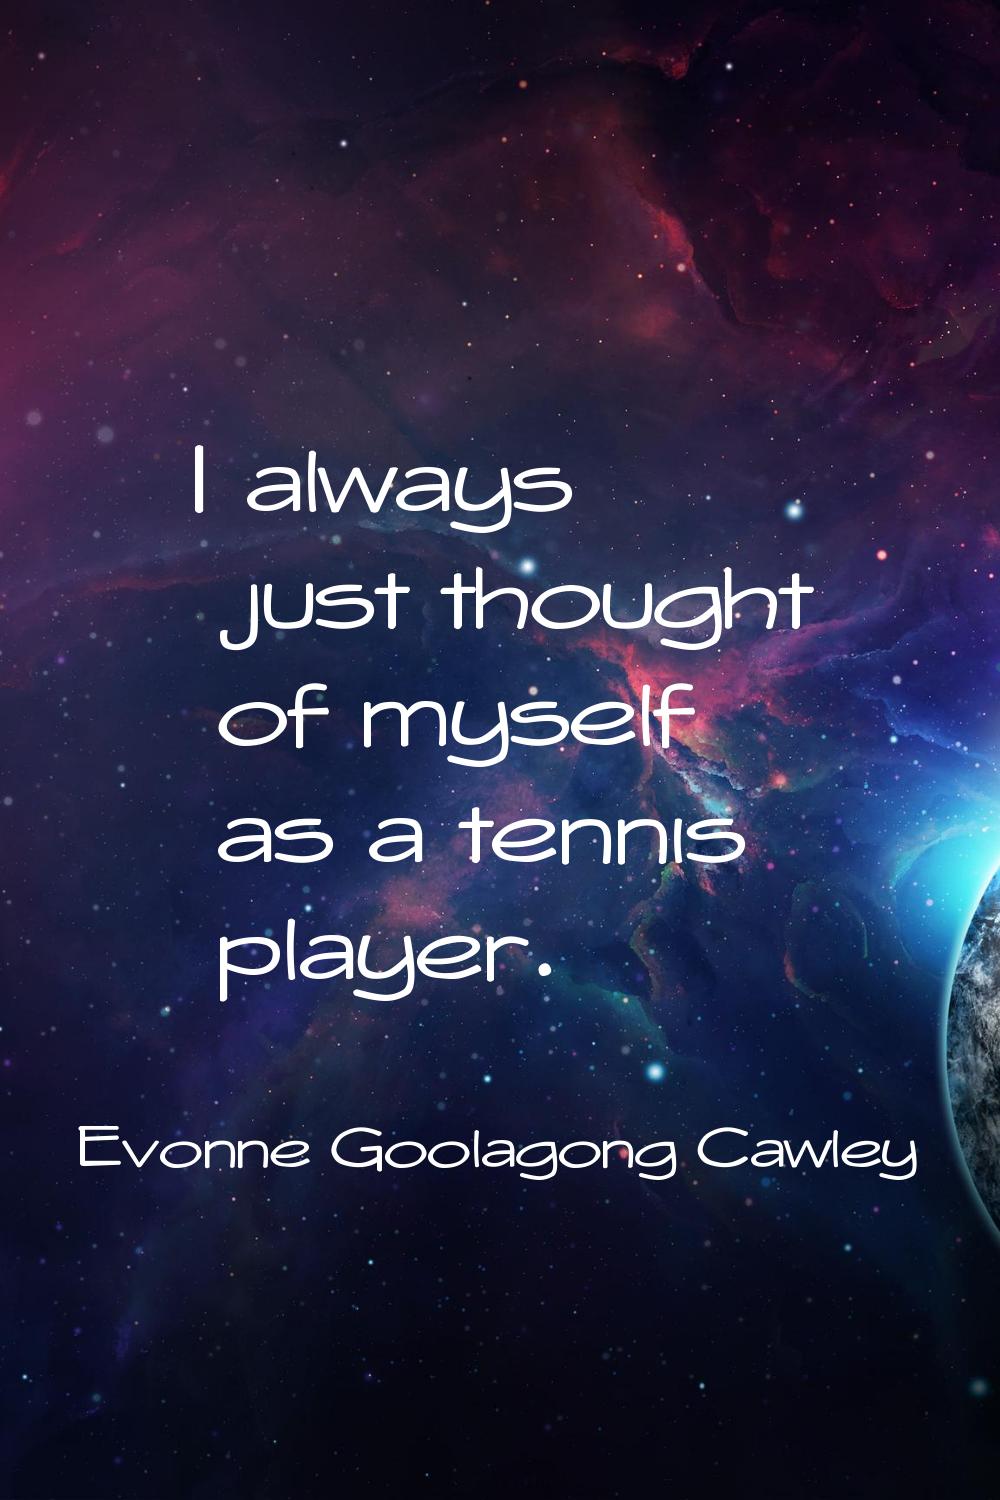 I always just thought of myself as a tennis player.